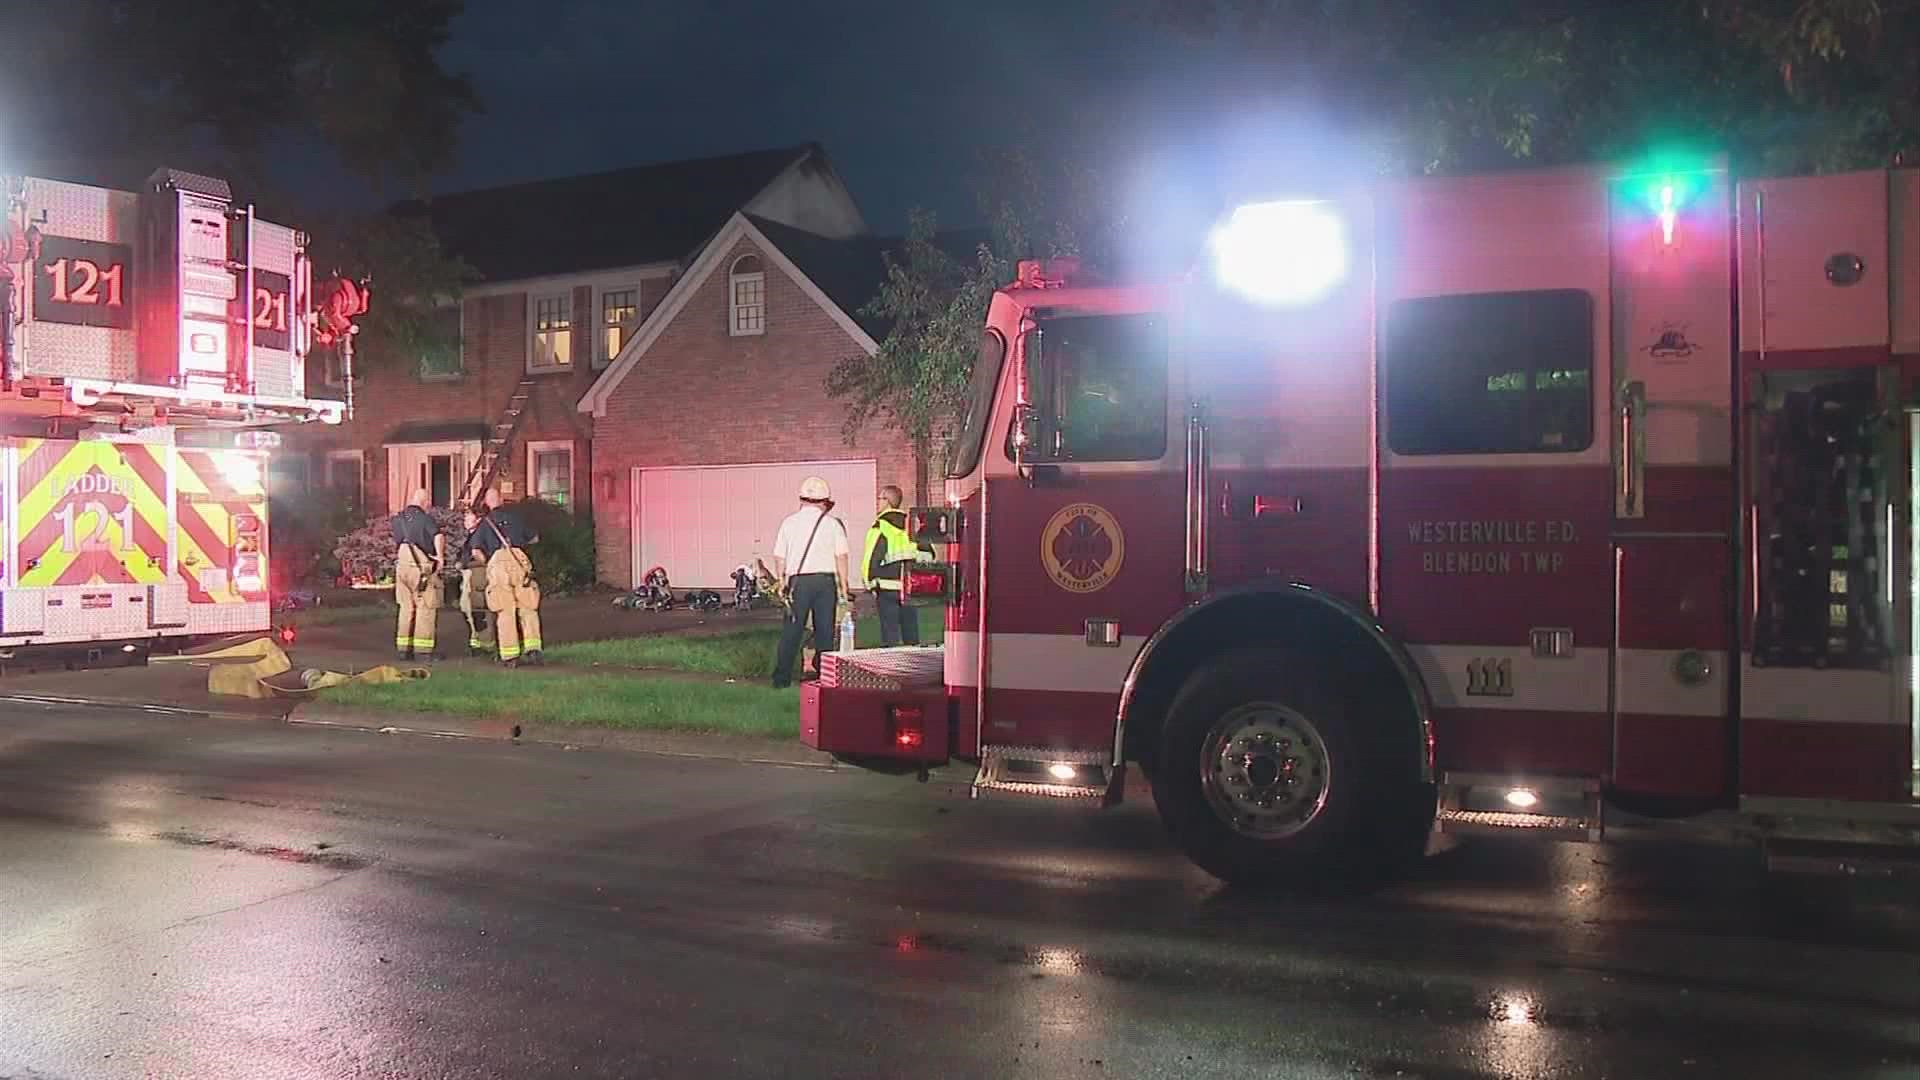 A fire in the attic of a Westerville home Sunday evening was caused by a lightning strike, according to the Westerville Division of Fire.